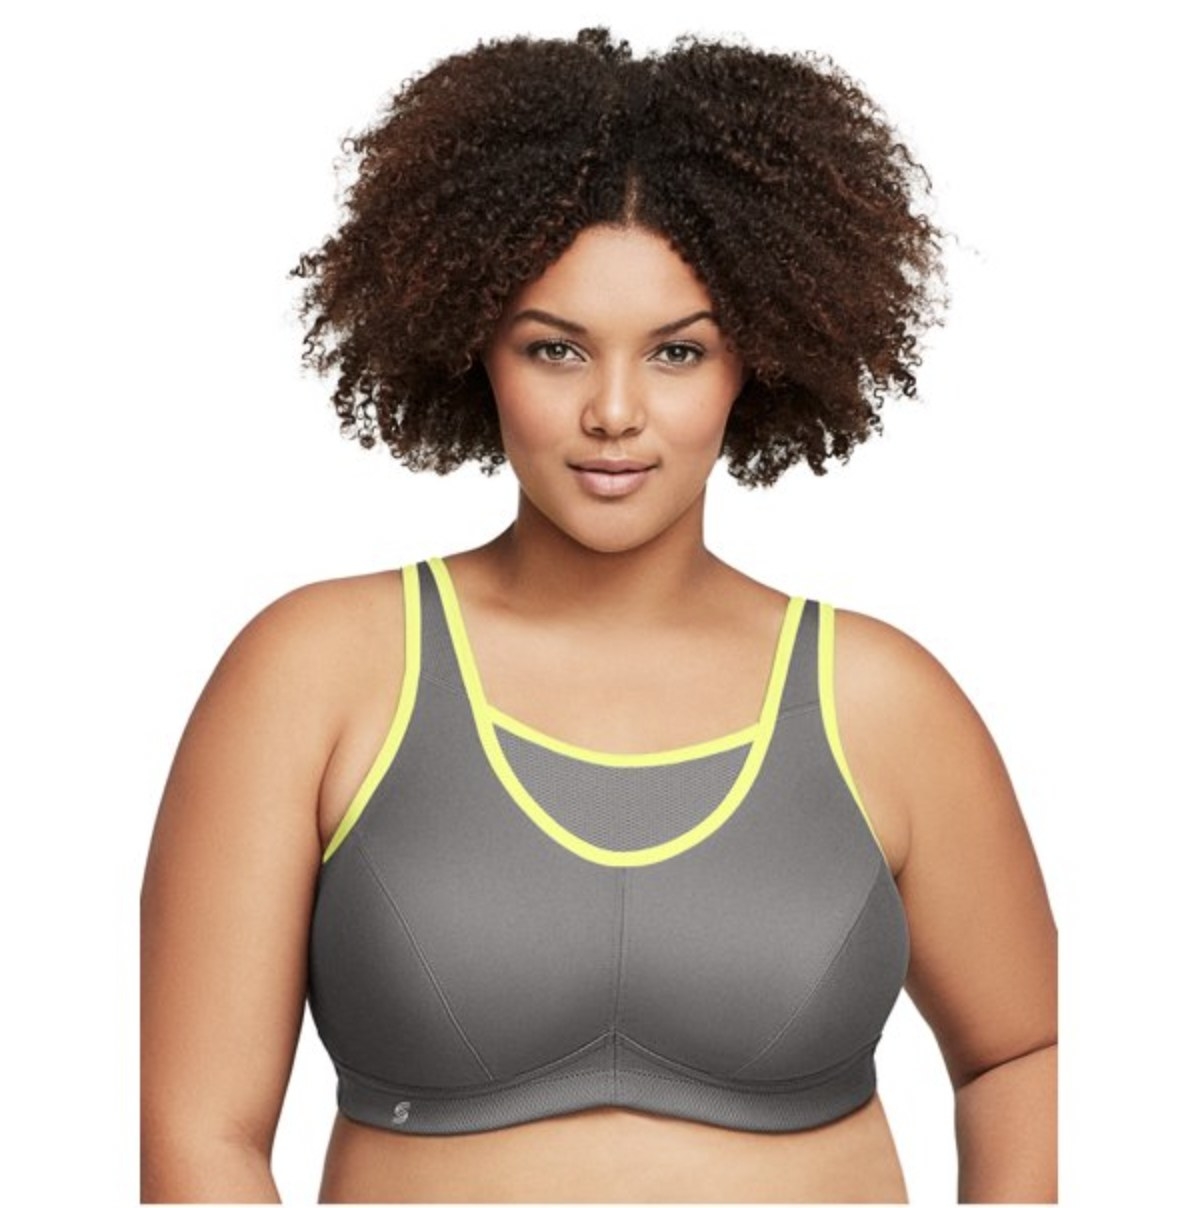 A person wearing a grey and yellow sports bra